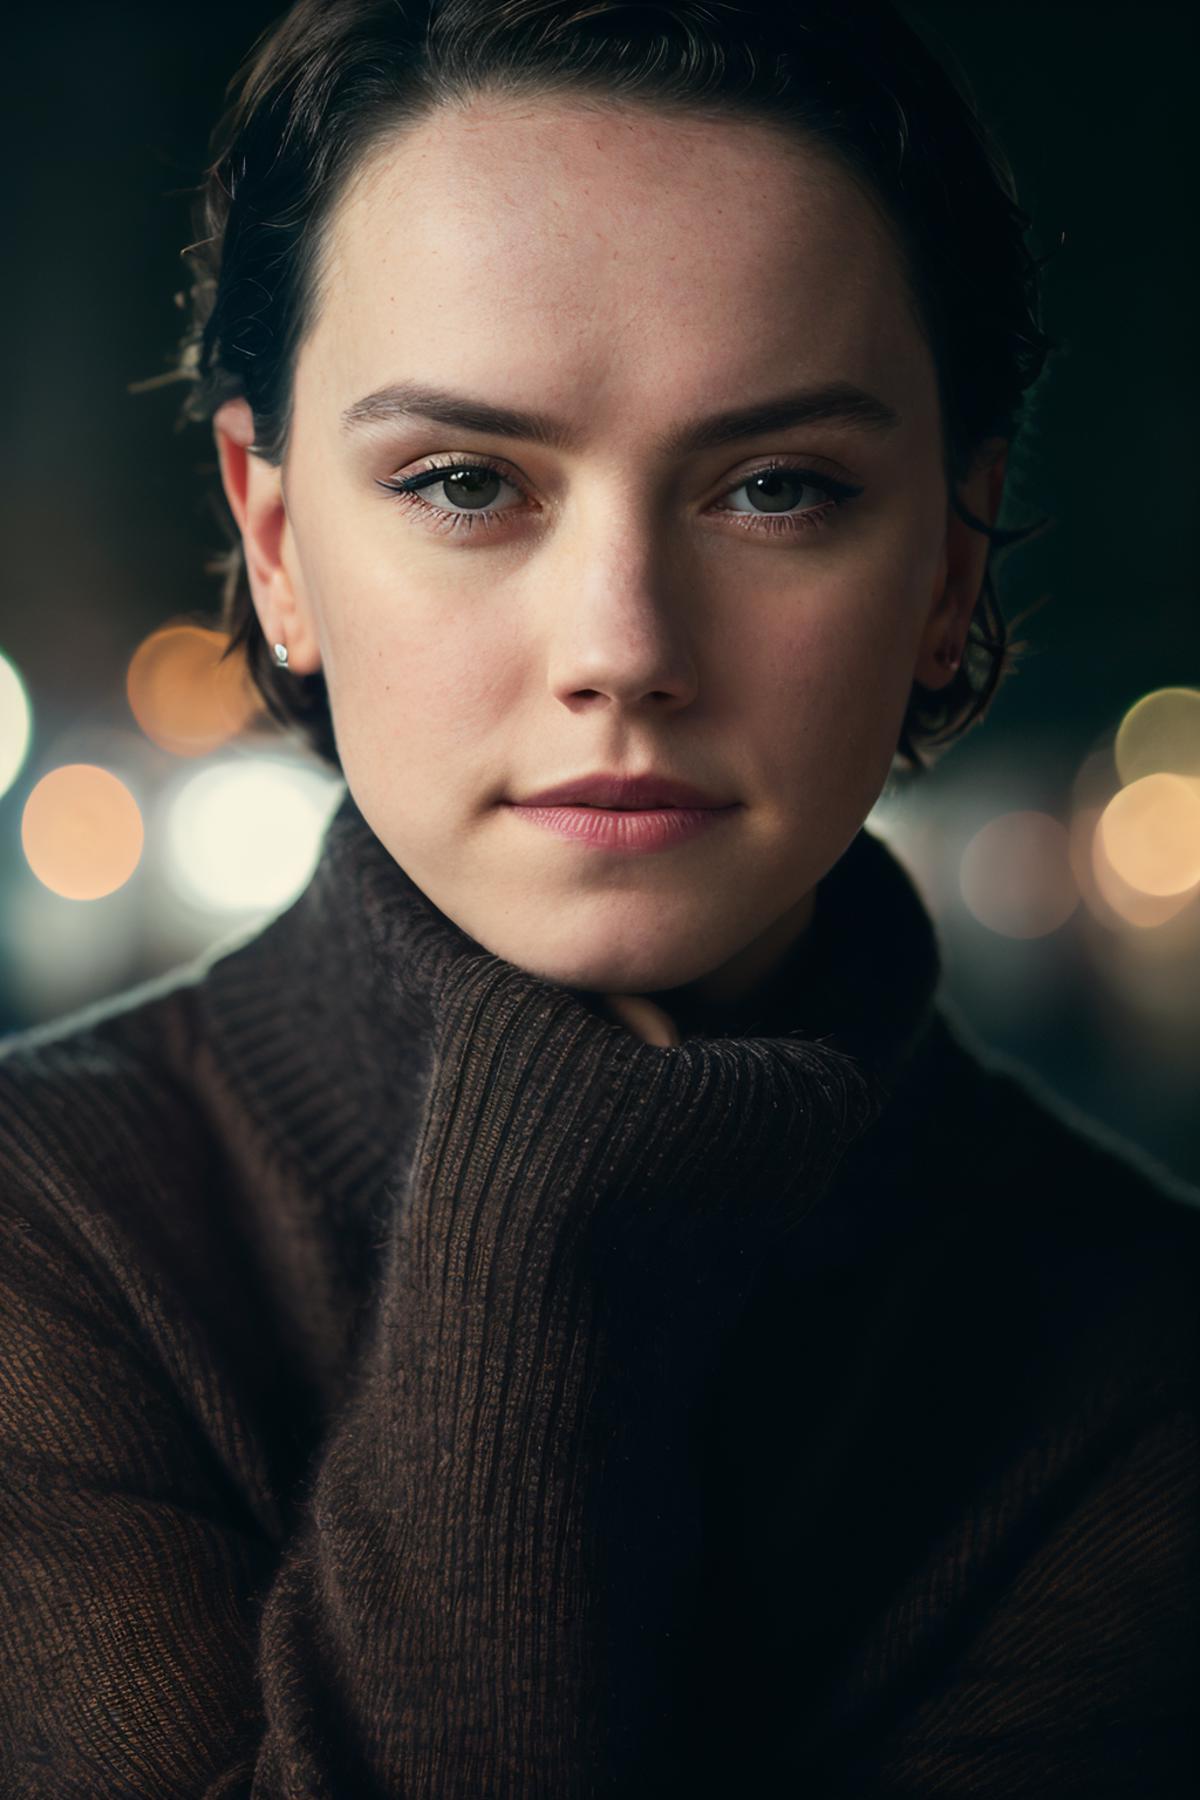 Daisy Ridley image by damocles_aaa